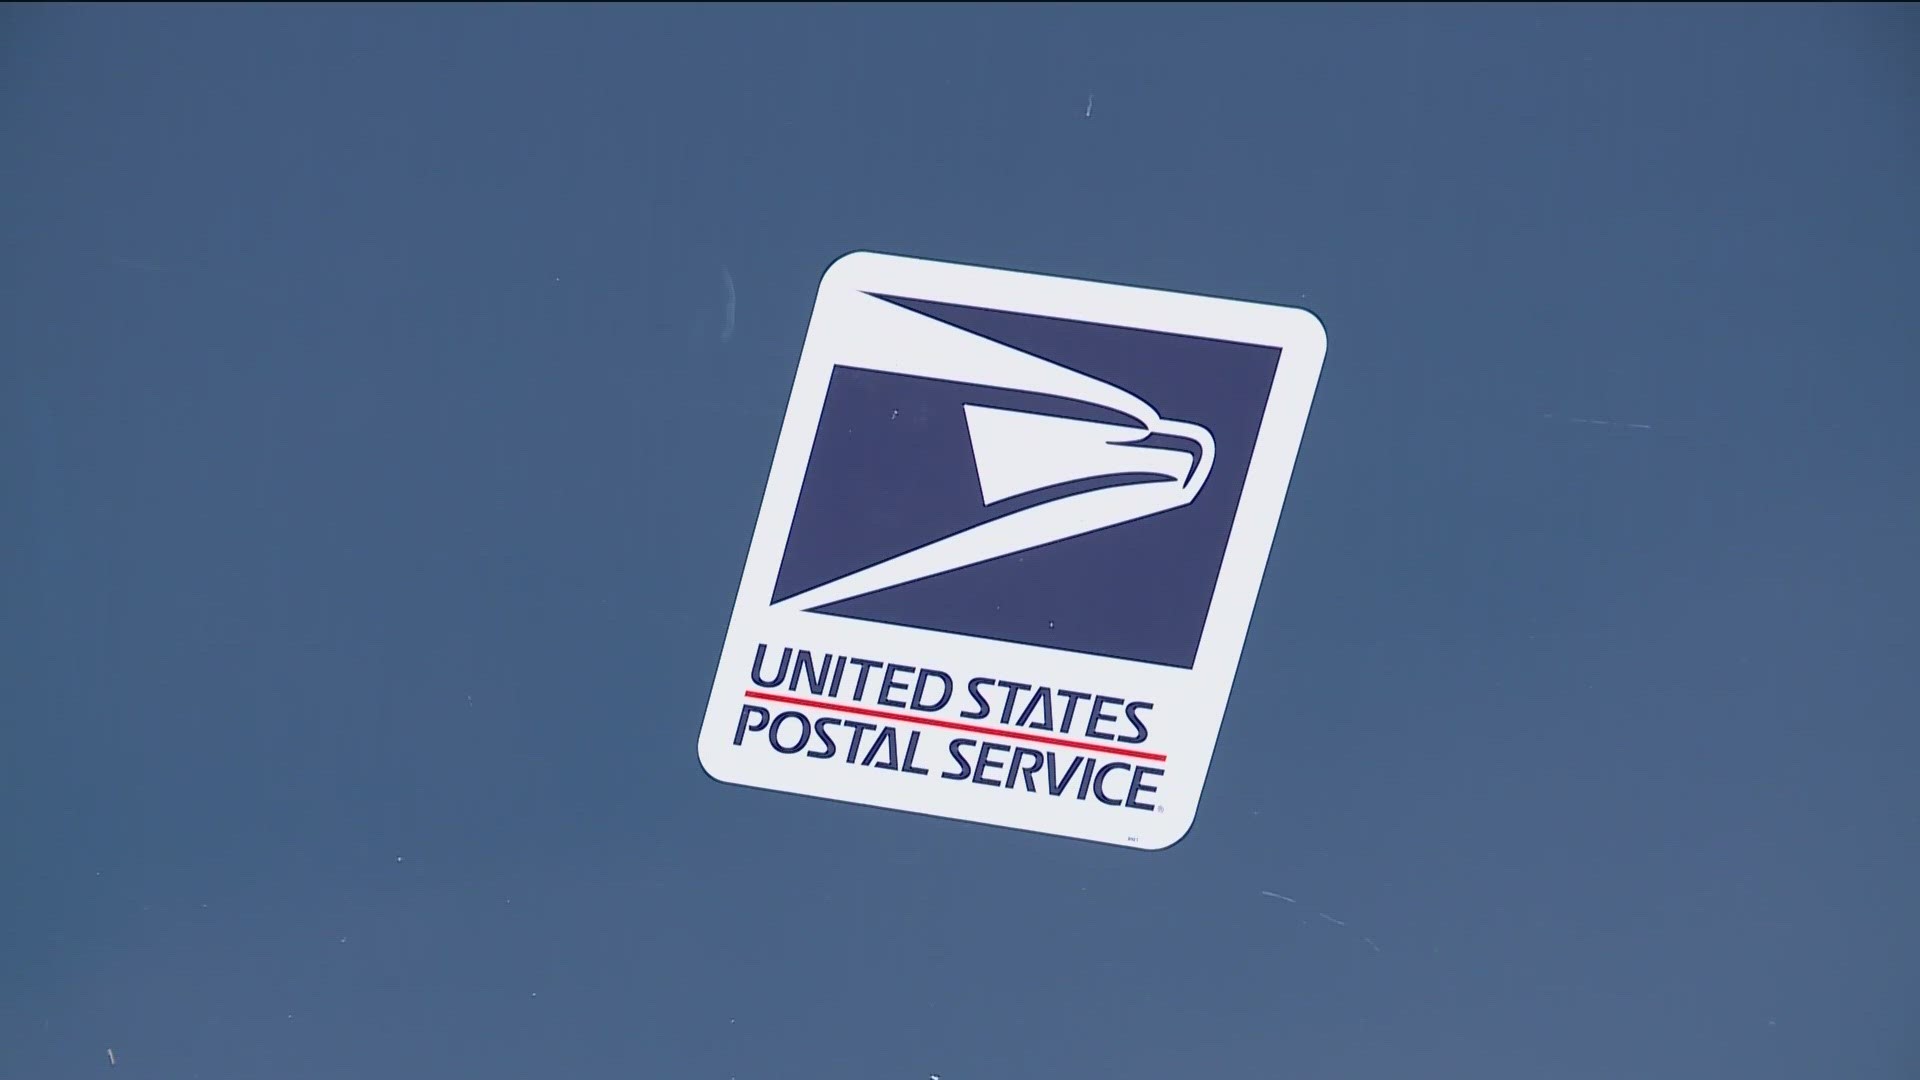 Although USPS says they will "modernize" the facilities and increase on-time delivery, Womack and other Congress members say they are "skeptical" of the new plan.